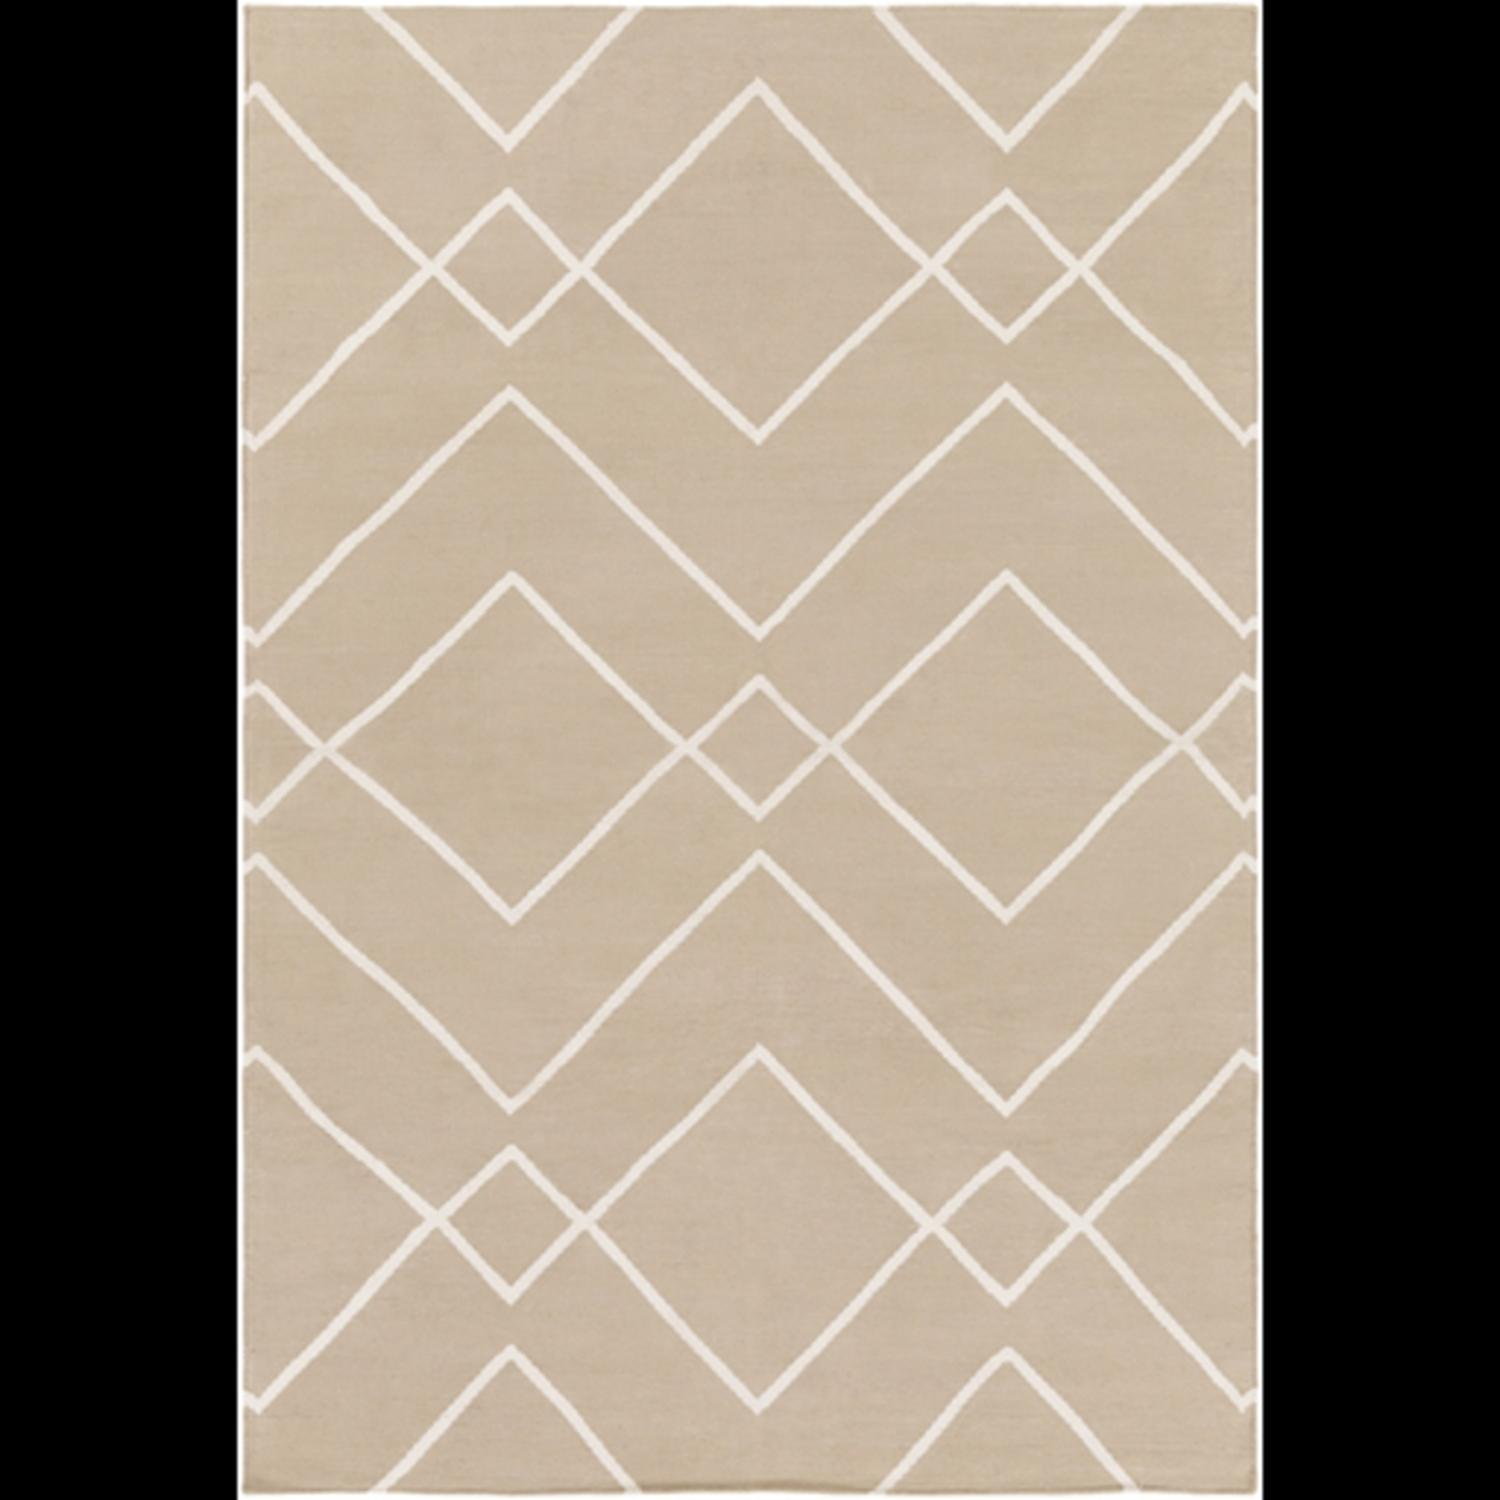 Diva At Home 6' x 9' Lively Masonry Fawn Brown and Misty Gray Area Throw Rug